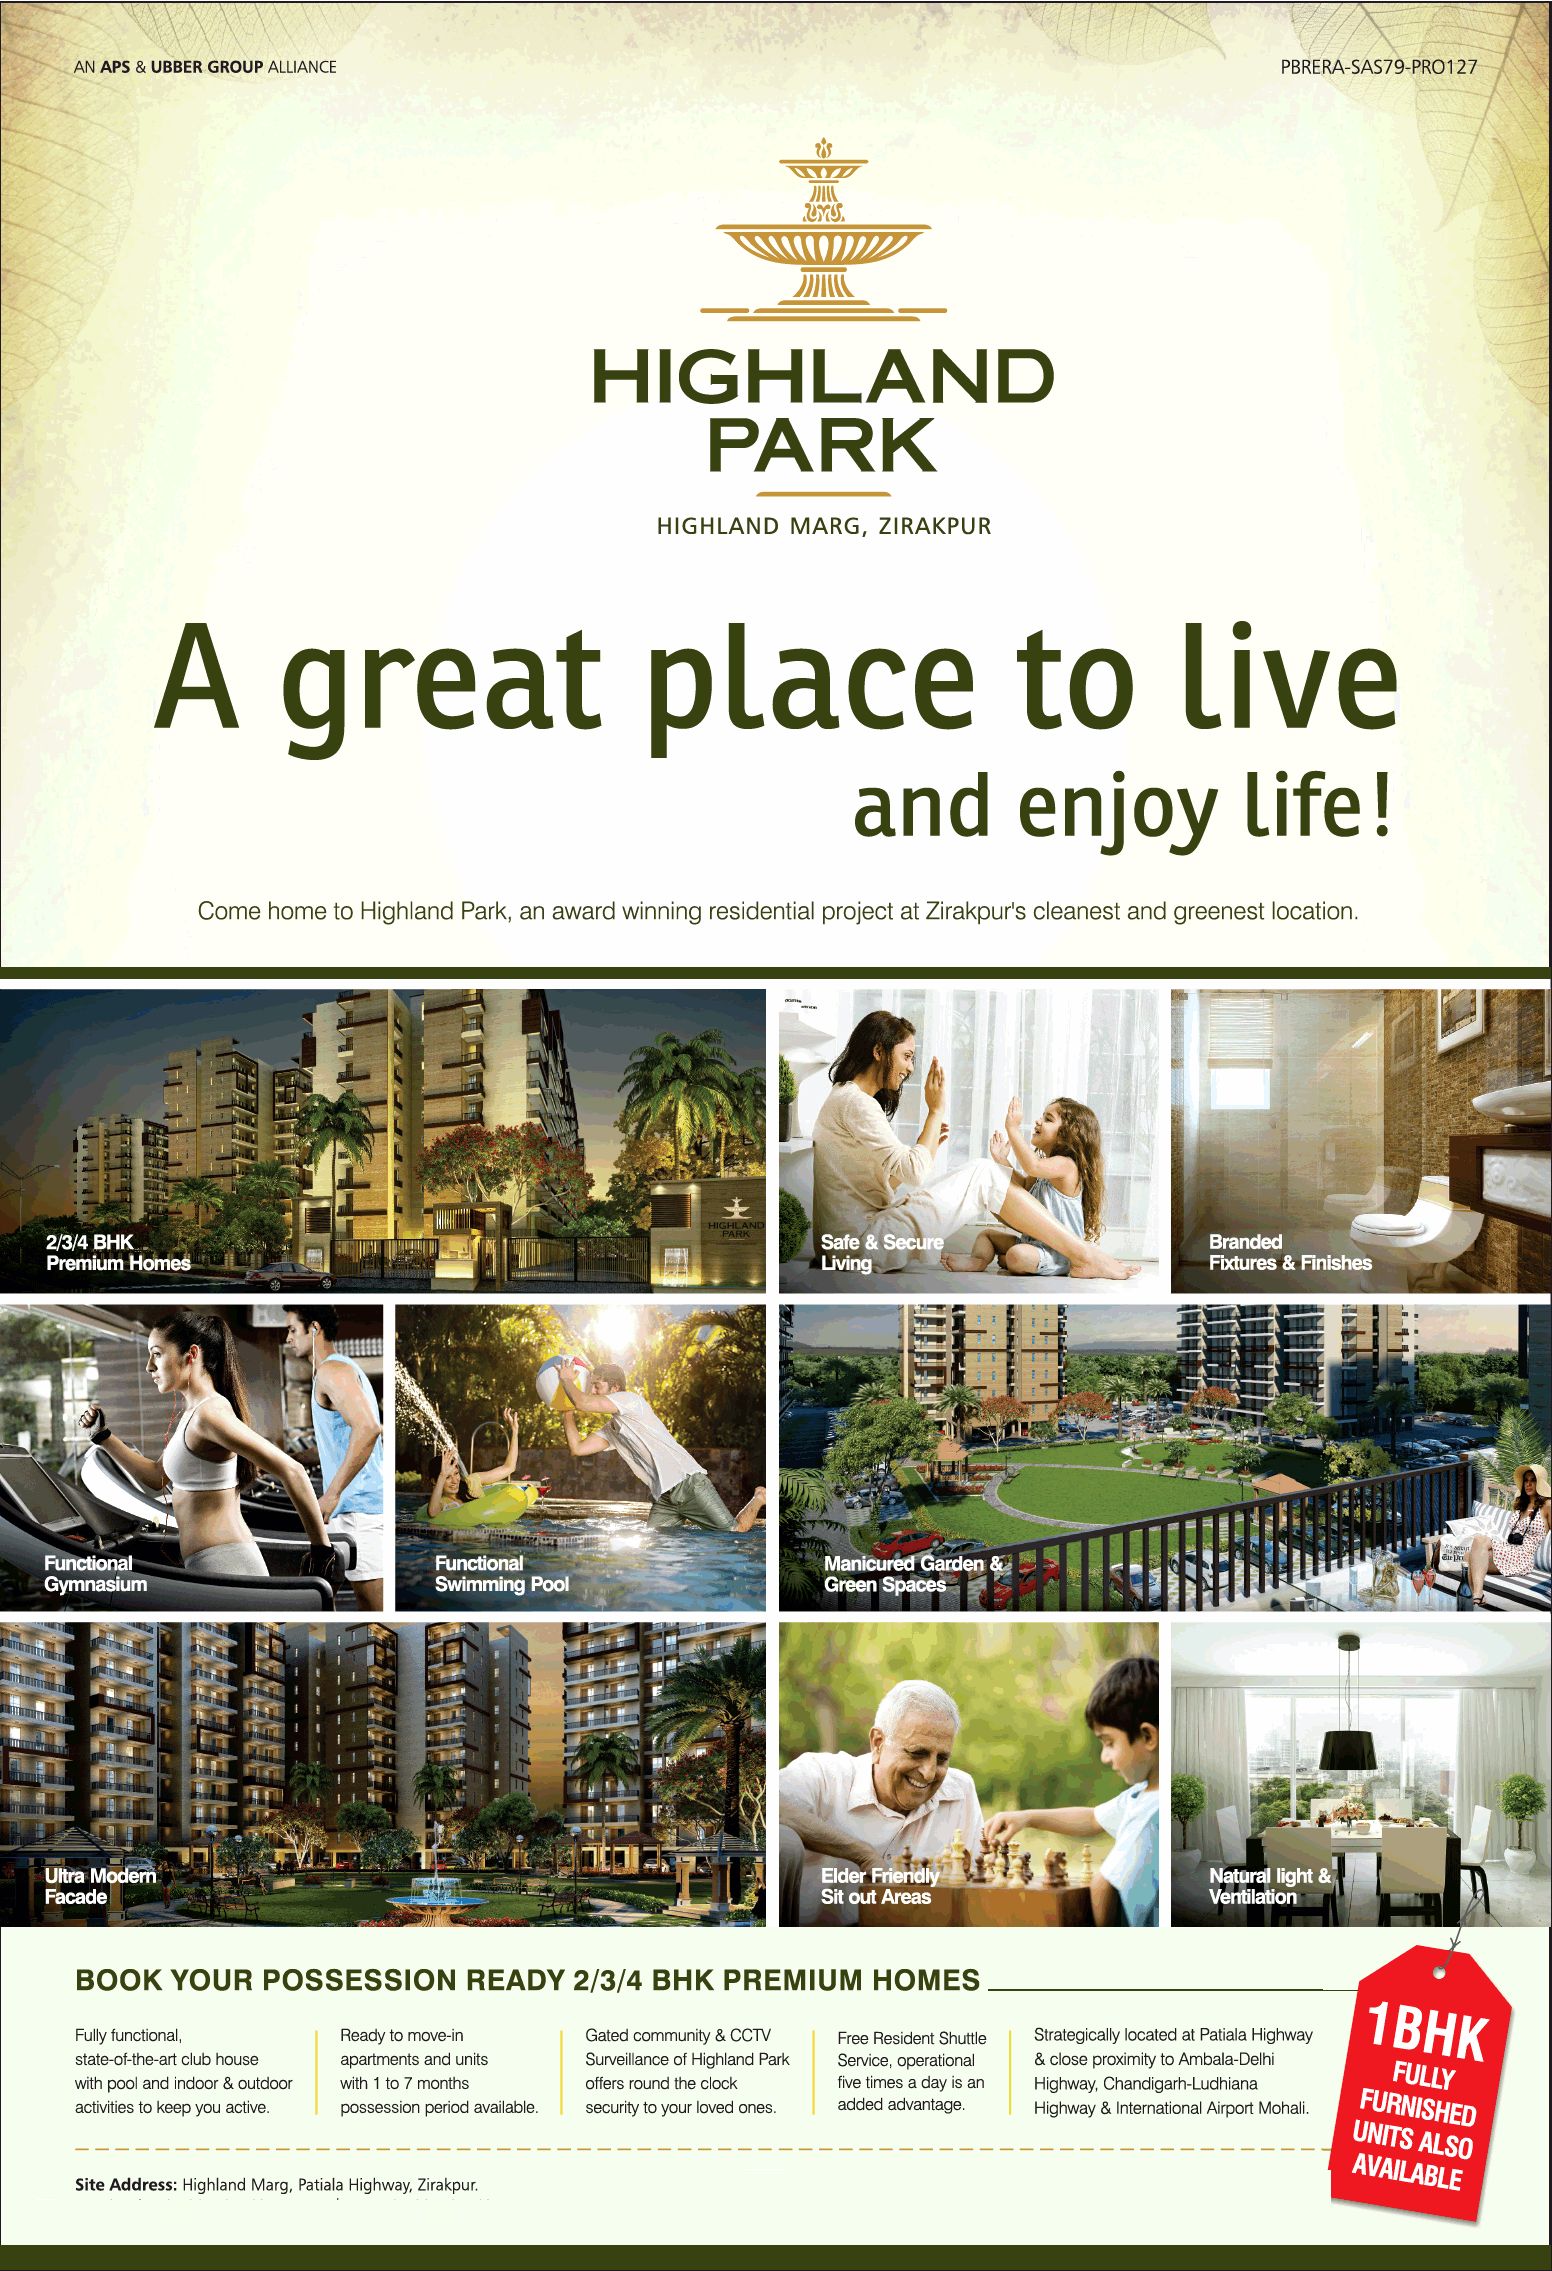 Book your possession ready 2/3/4 BHK premium homes at Highland Park, Chandigarh